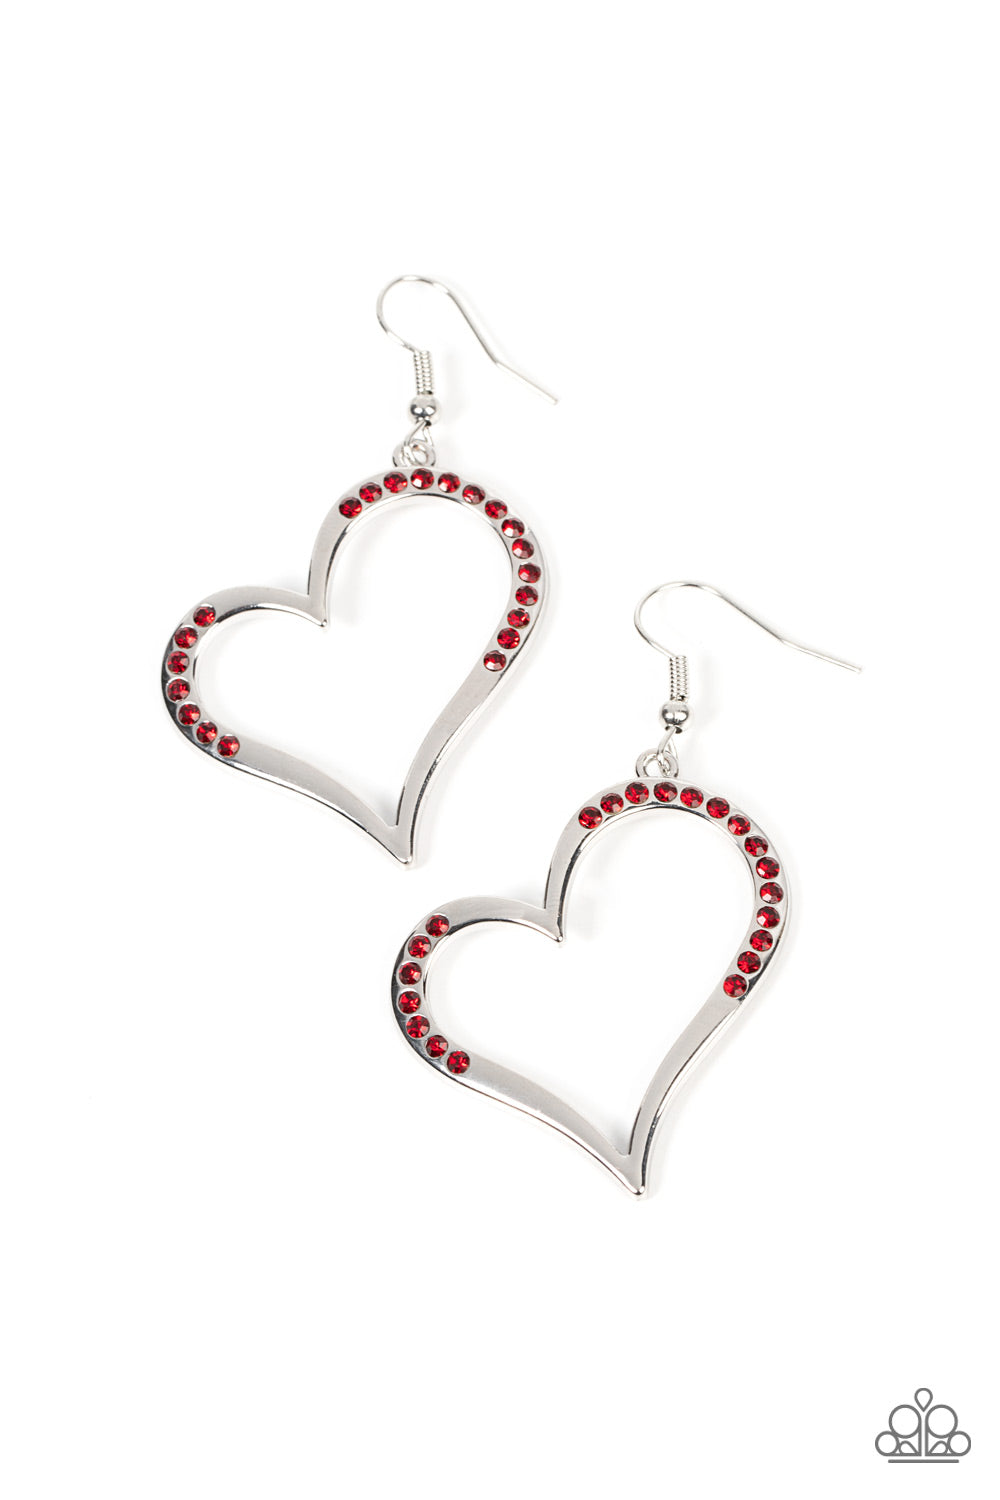 Tenderhearted Twinkle Red Earring - Paparazzi Accessories  A curvaceous silver heart is encrusted in sections of fiery red rhinestones, invoking a flirtatious flair. Earring attaches to a standard fishhook fitting.  Sold as one pair of earrings.